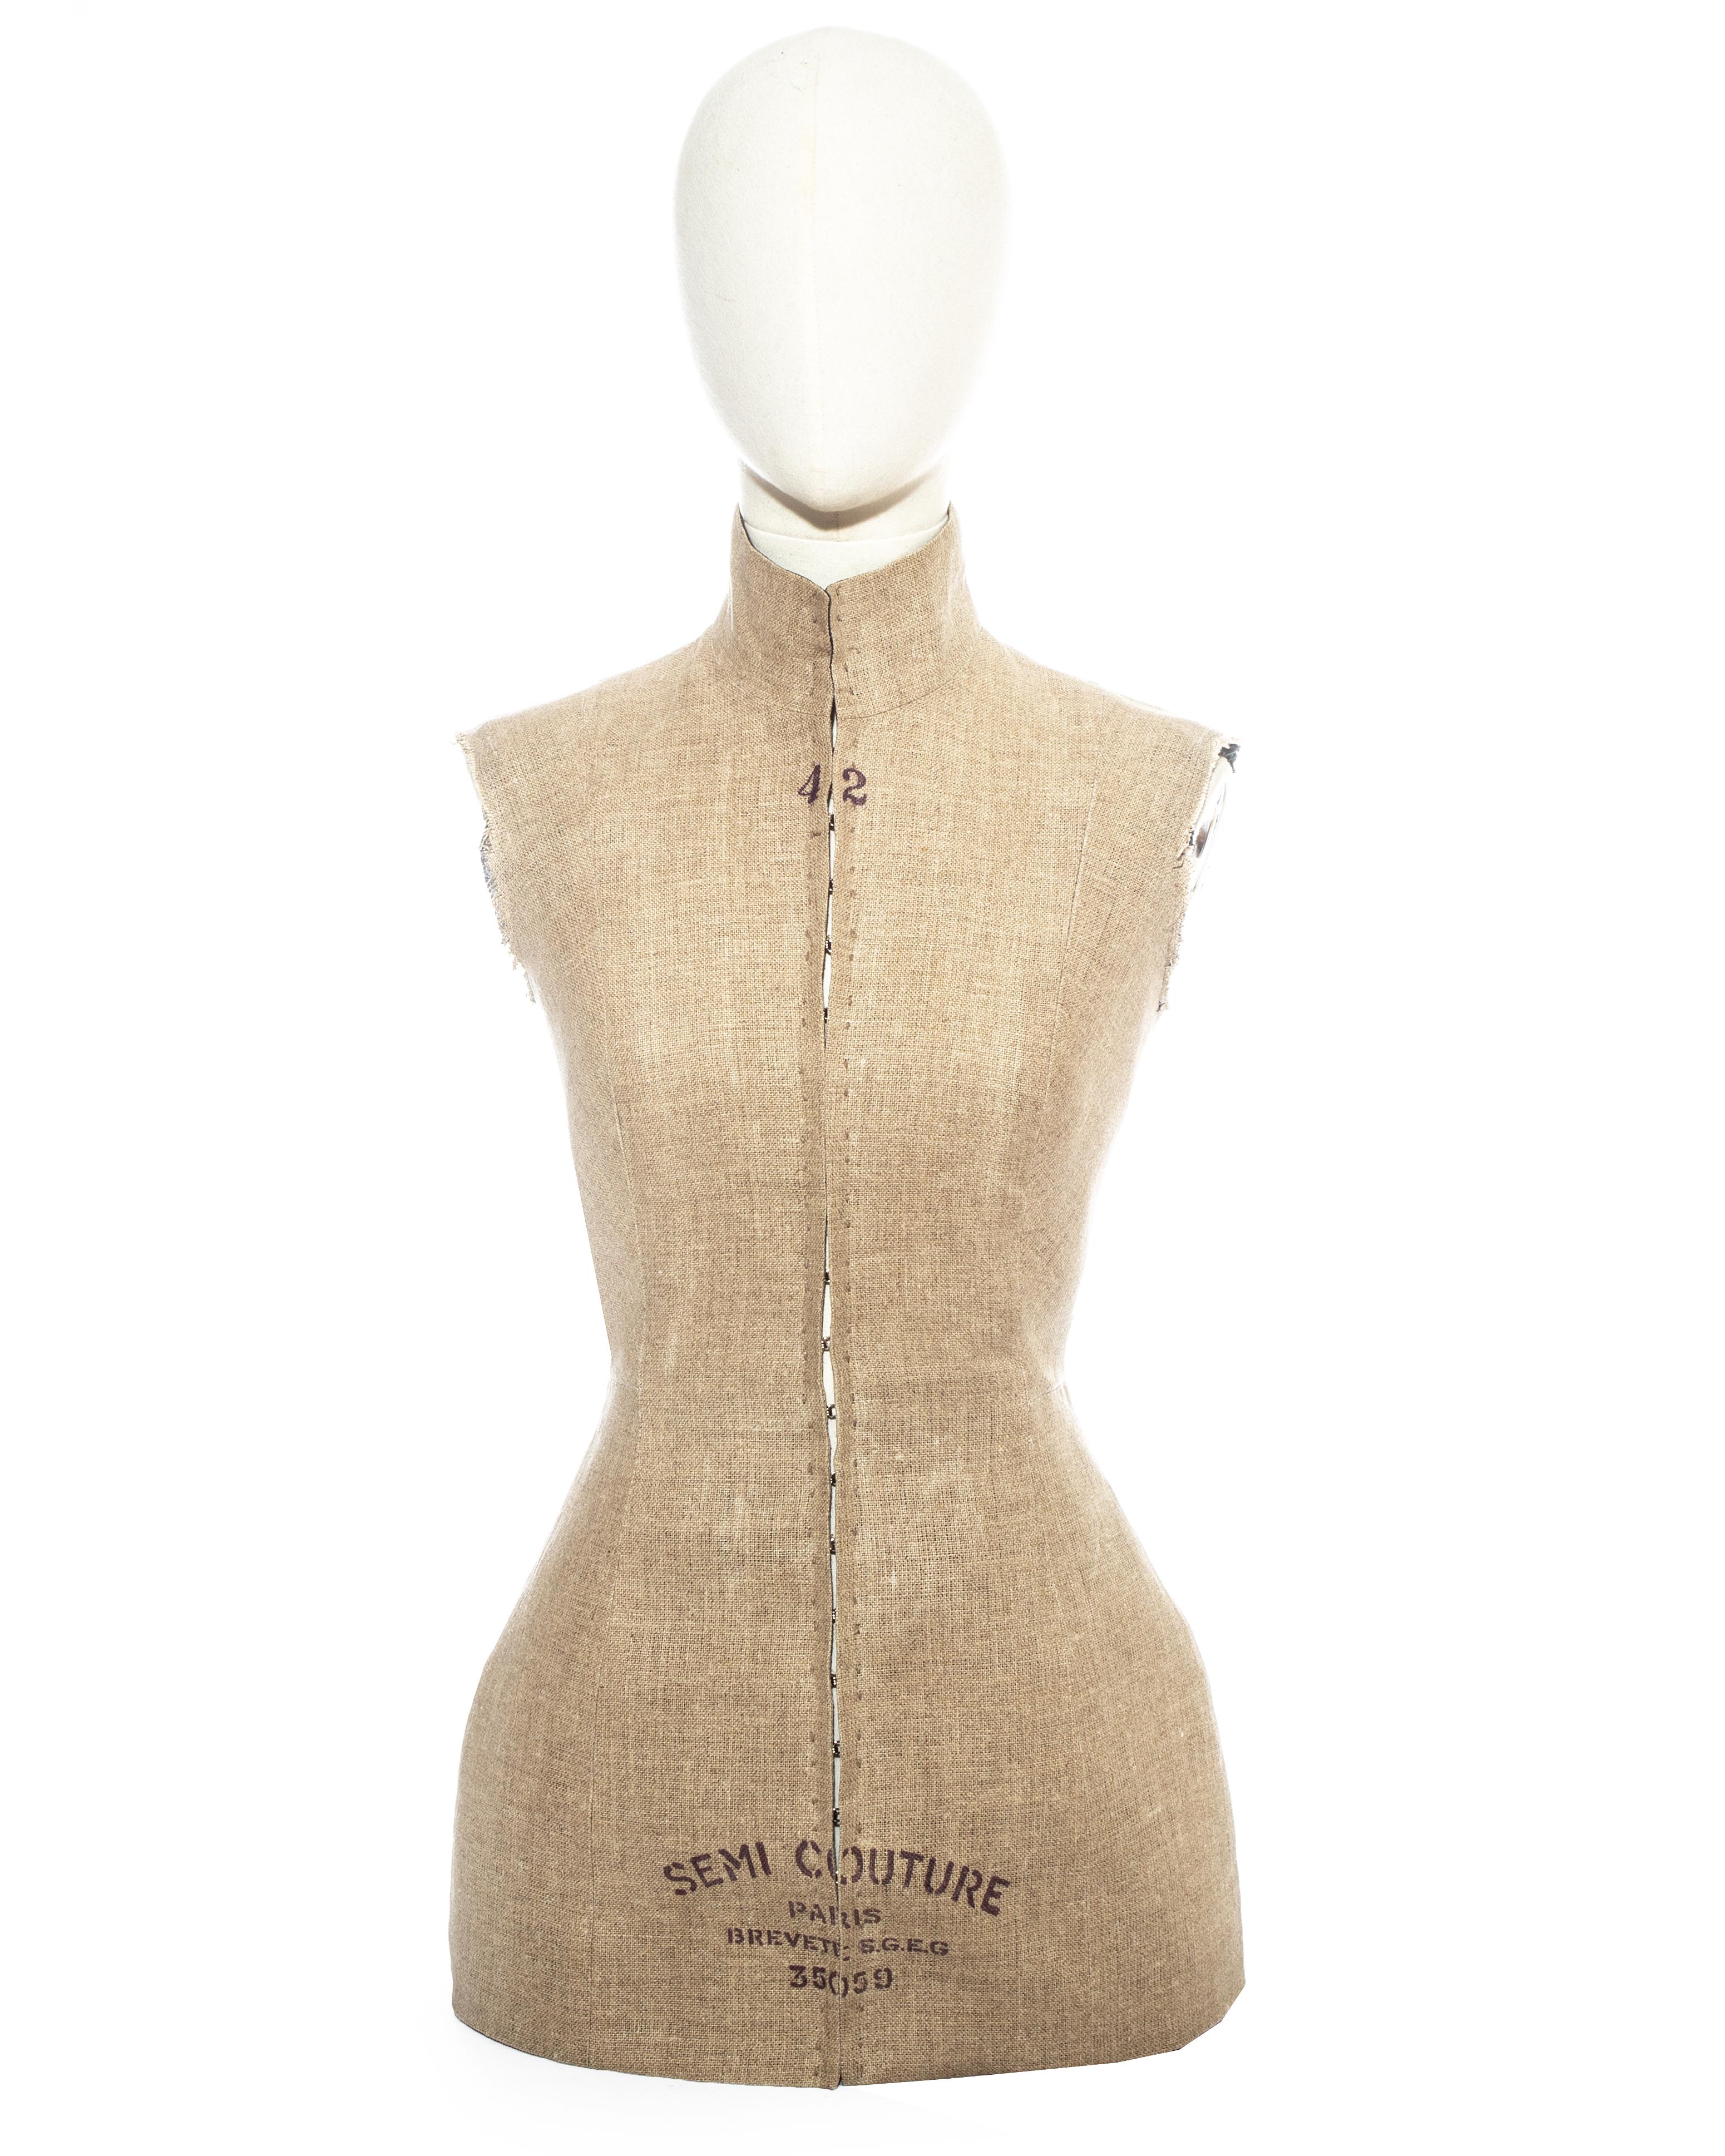 Martin Margiela; Linen Semi Couture Stockman corseted waistcoat. Stamped in black ink resembling a traditional Stockman mannequin bust. Metal hook and eye fastenings at the centre front, high neck, black cotton lining, and raw edges around the